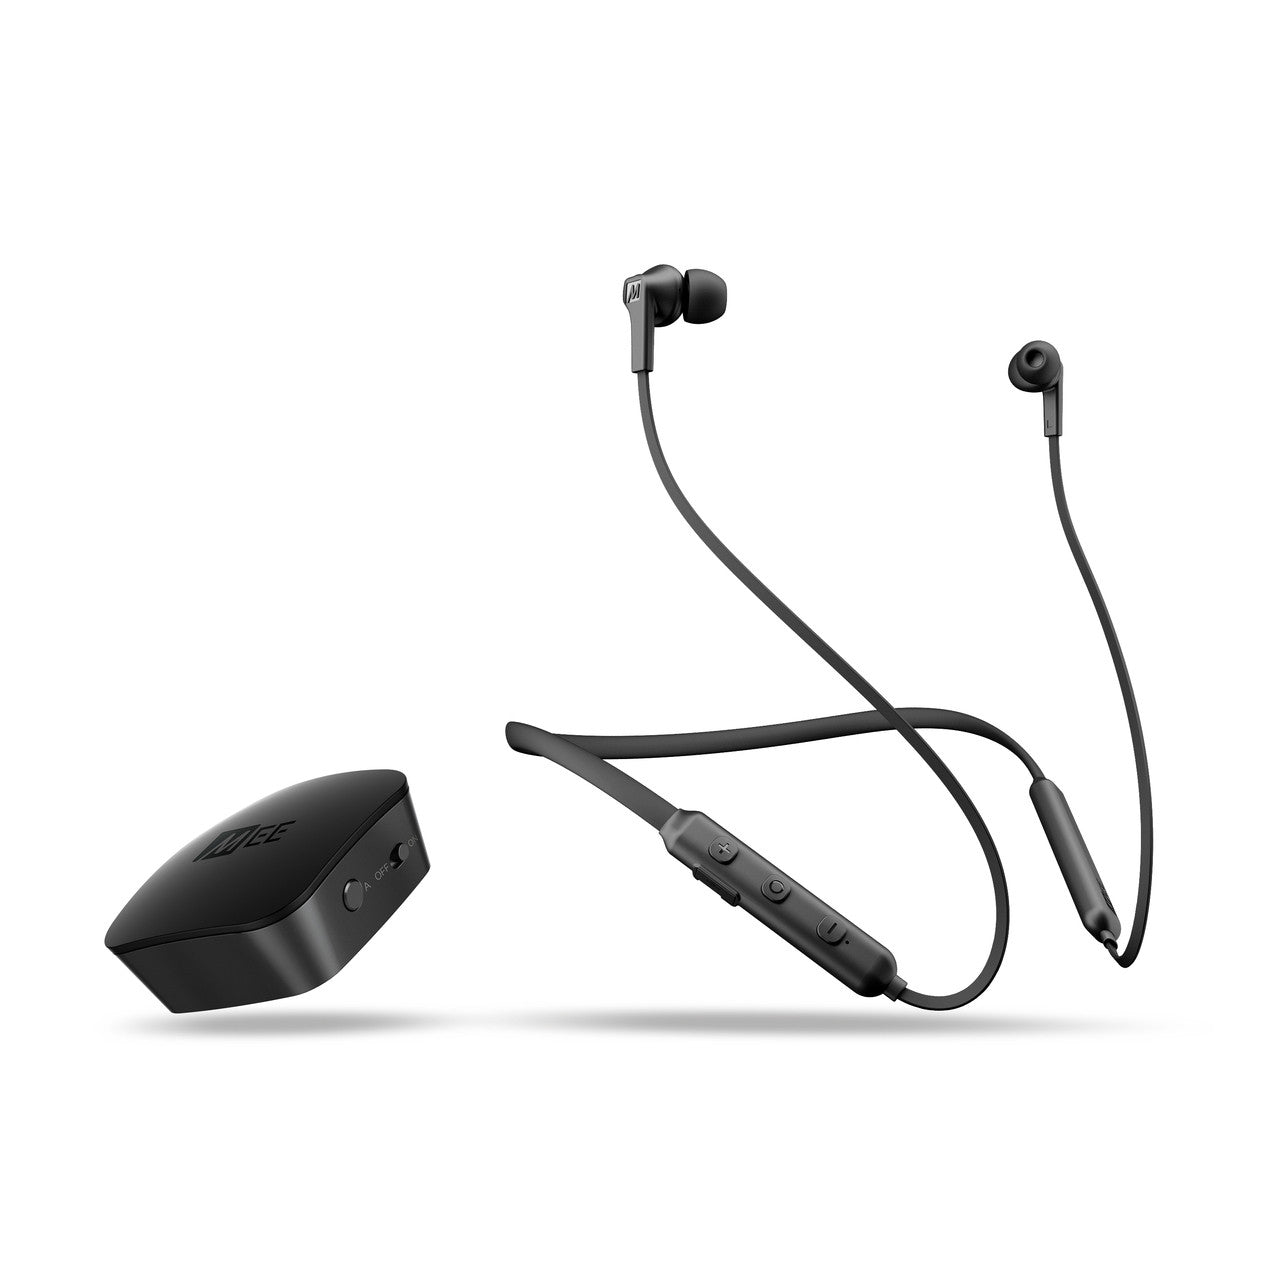 Image of [Refurbished] Connect T1N1 Wireless Headphone System for TV - Includes Bluetooth Transmitter and Neckband Headphones.